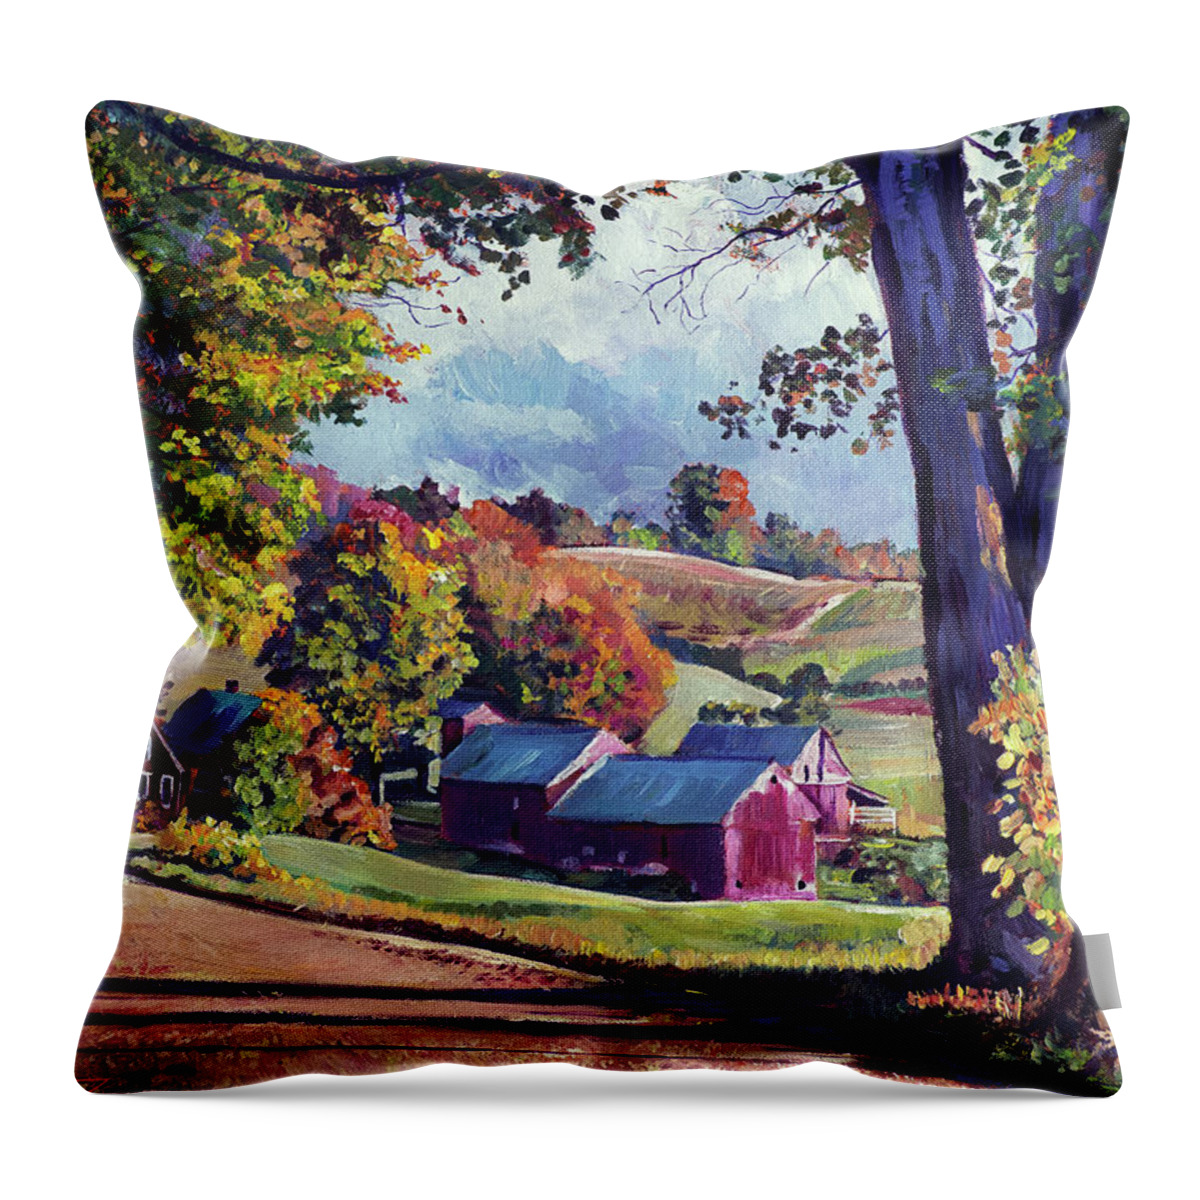 Landscape Throw Pillow featuring the painting Down To The Farm by David Lloyd Glover